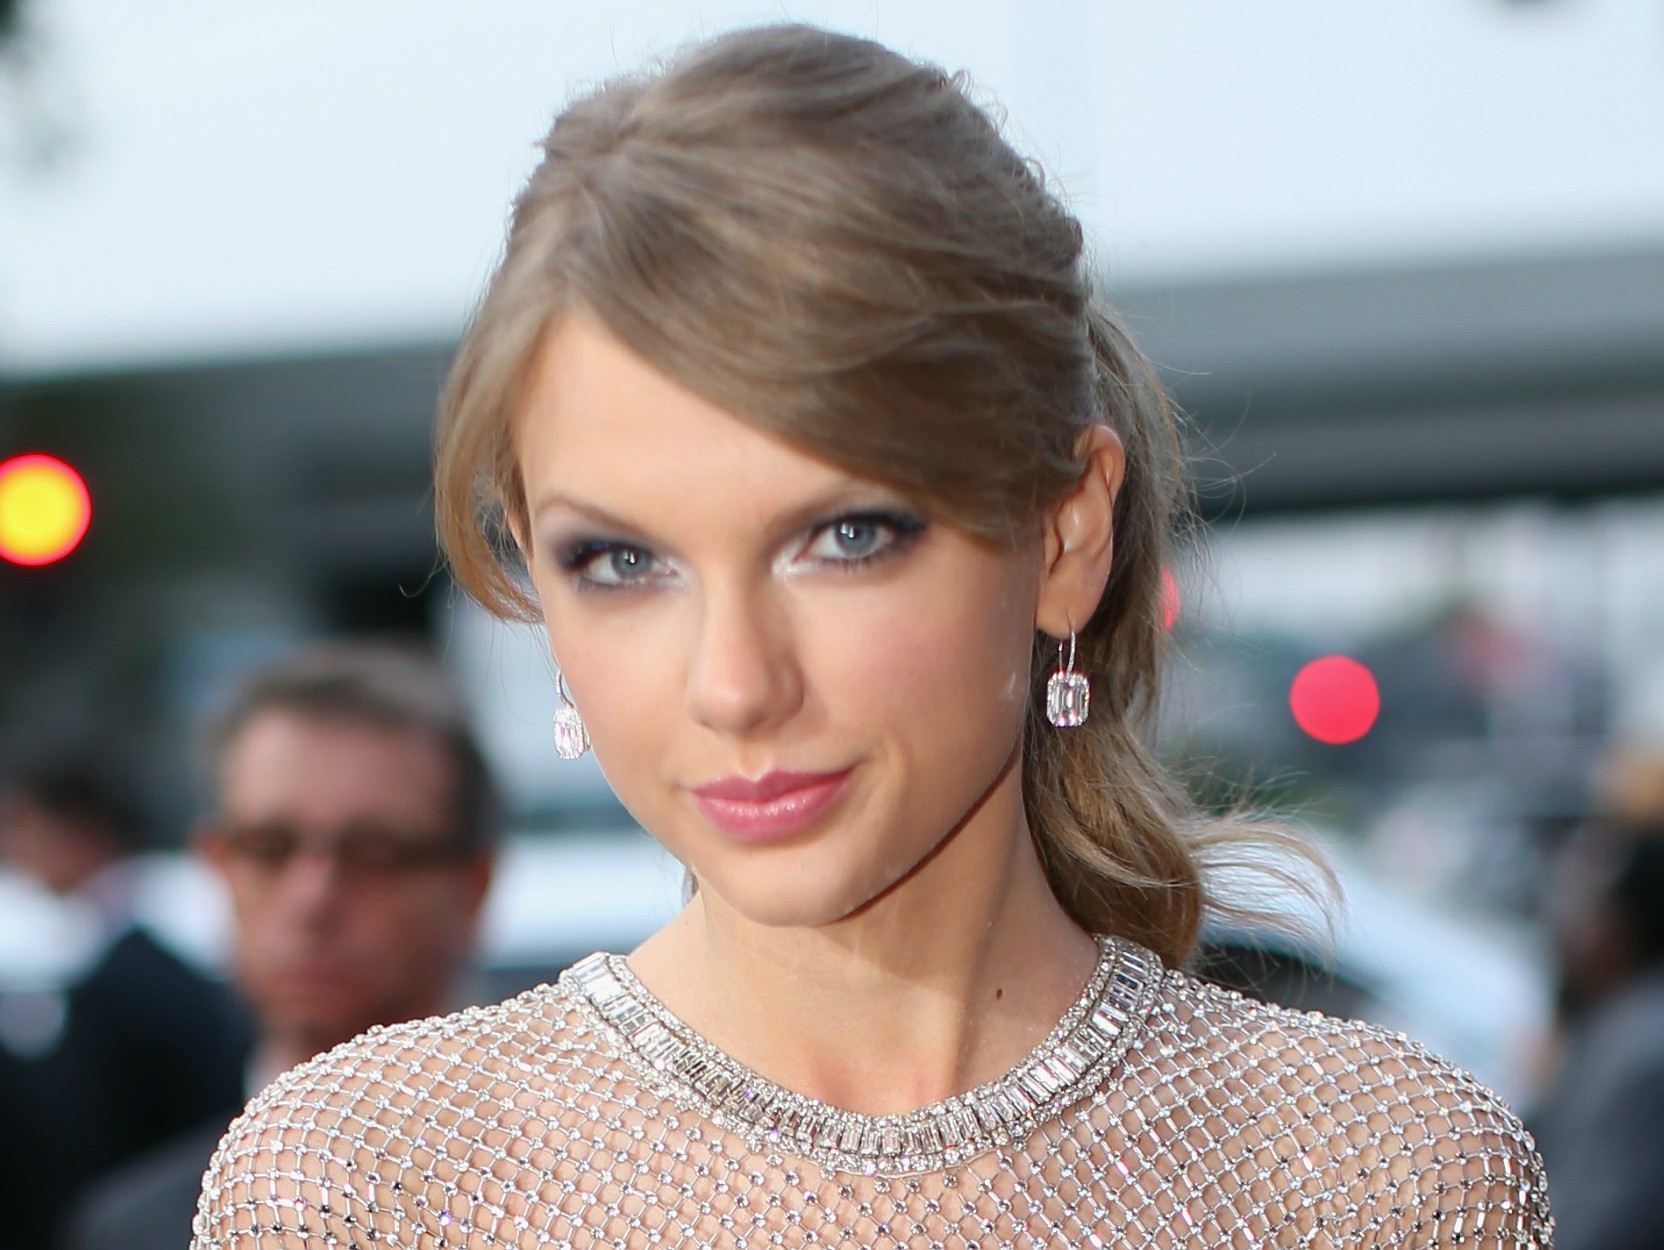 A cantora country Taylor Swift, de 24 anos. (Foto: Getty Images)